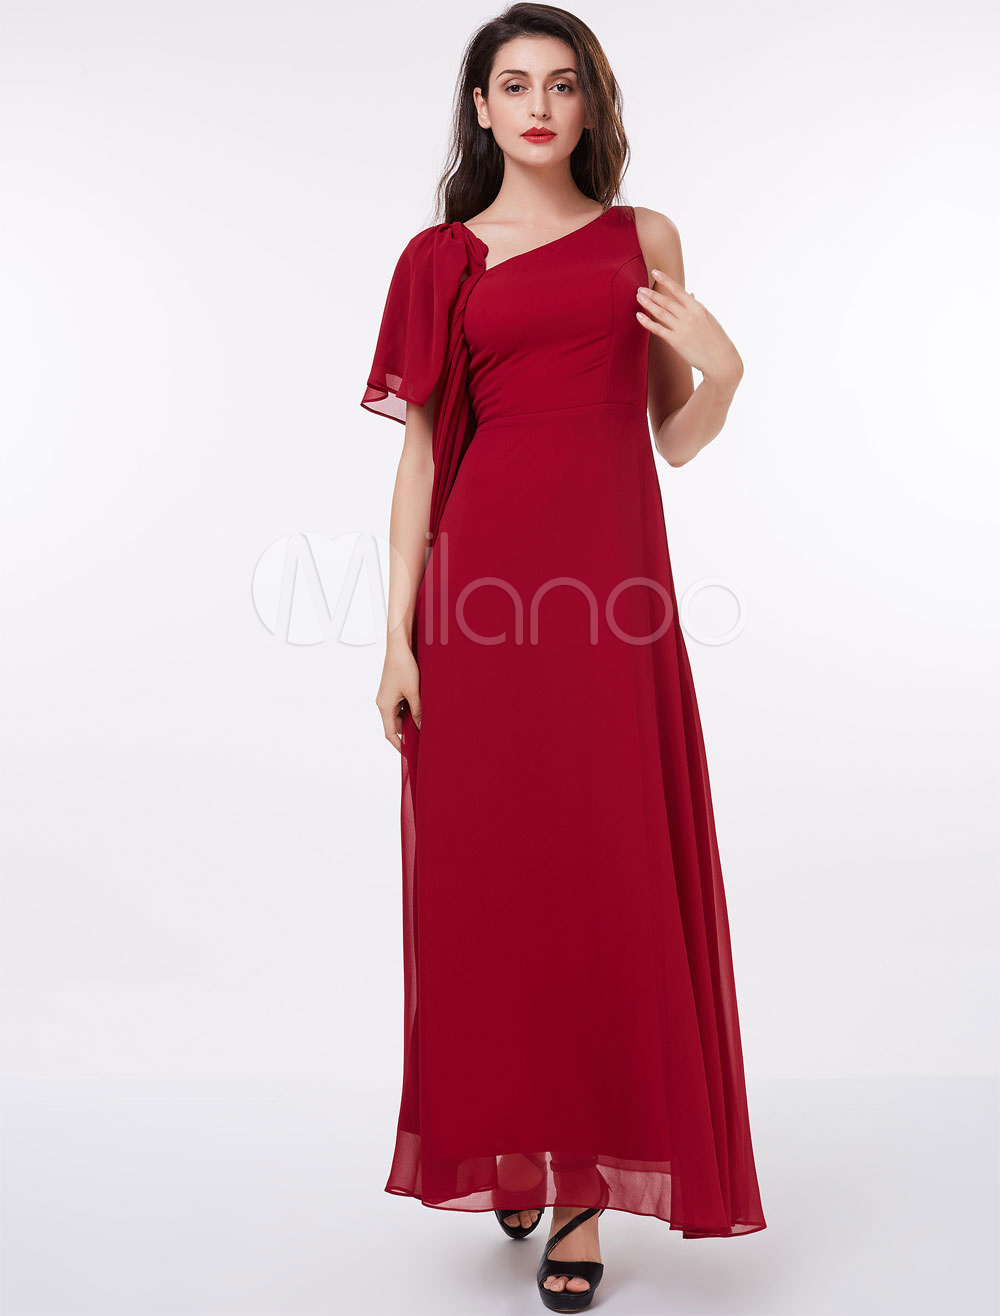 Mother Of The Bride Dresses Red Formal Dress One Sleeve Draped Floor Length Occasion Dress (Wedding) photo